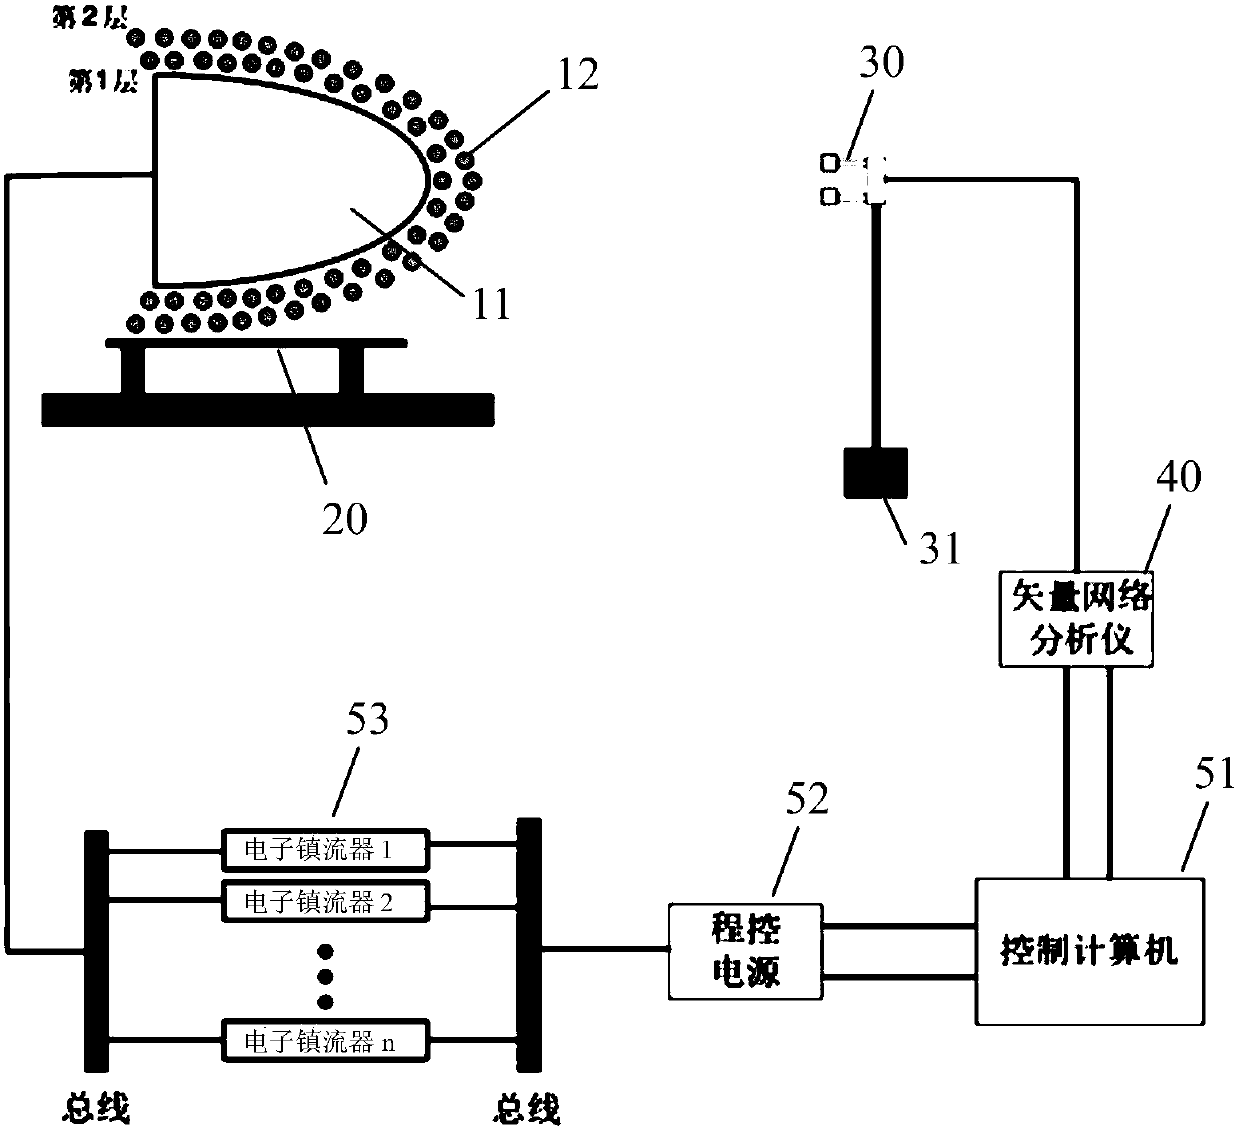 Testing system and method for ultrahigh sound velocity two-dimensional plasma sheath